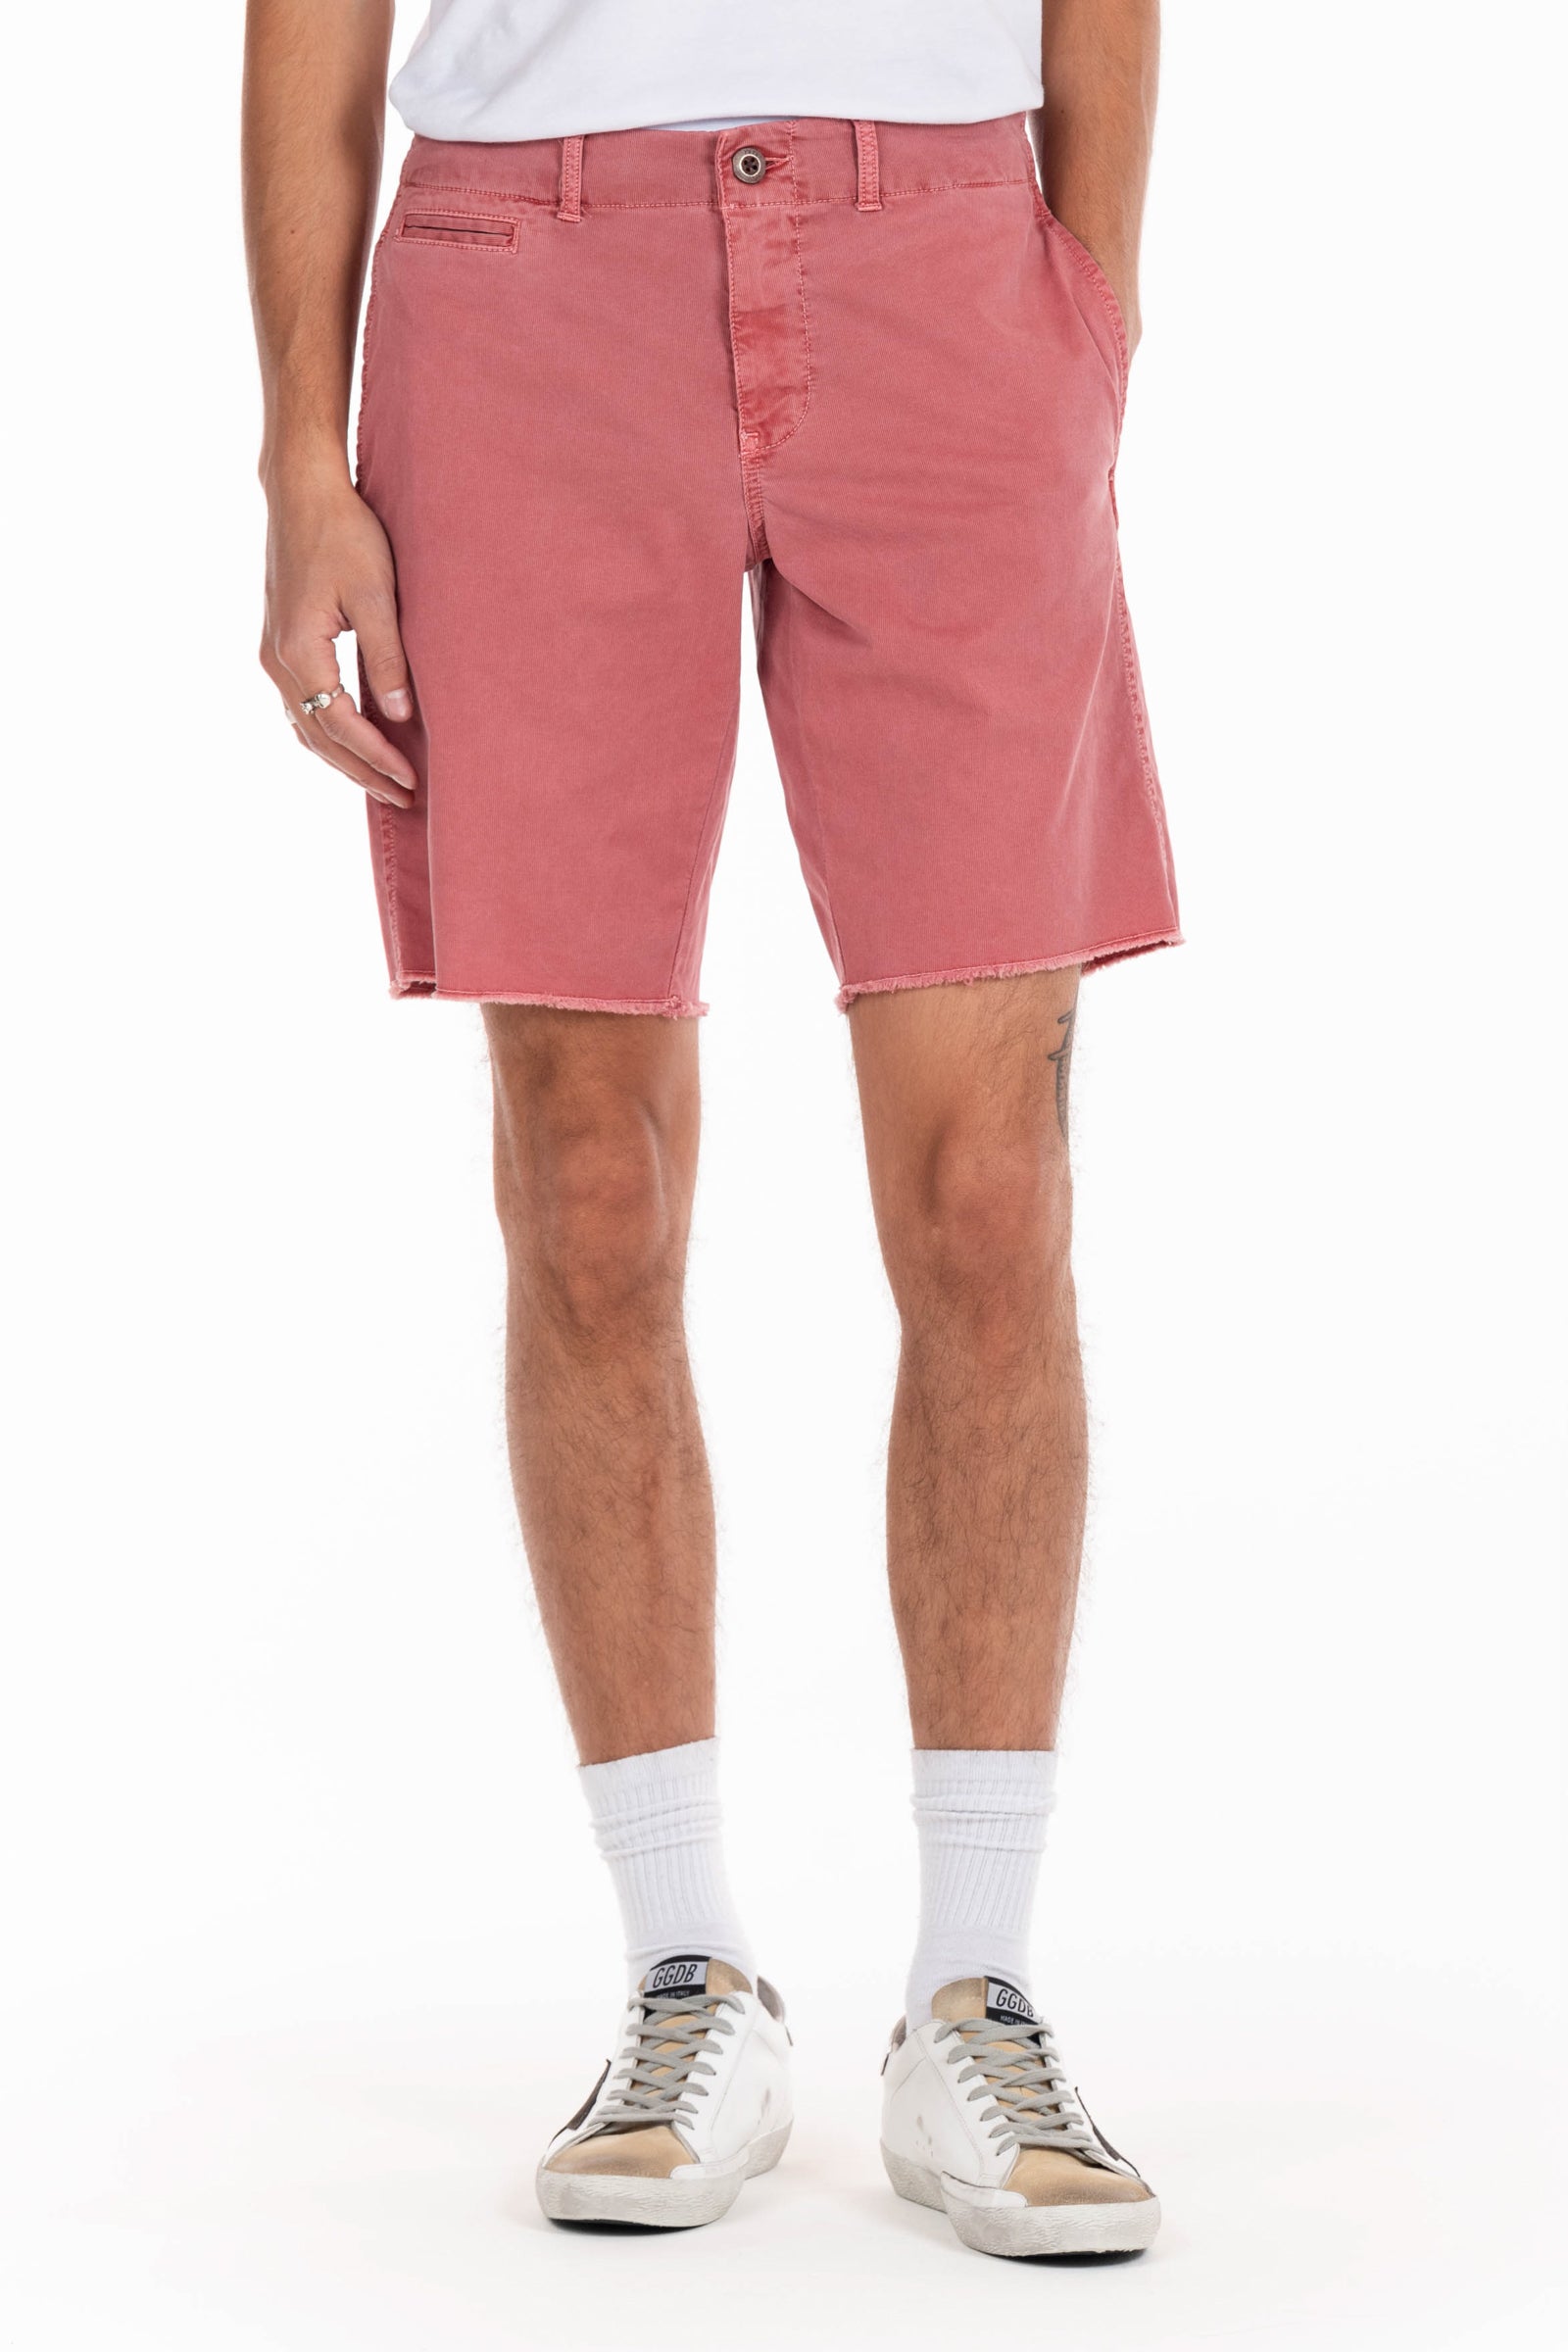 Original Paperbacks Rockland Chino Short in Berry on Model Cropped Styled View